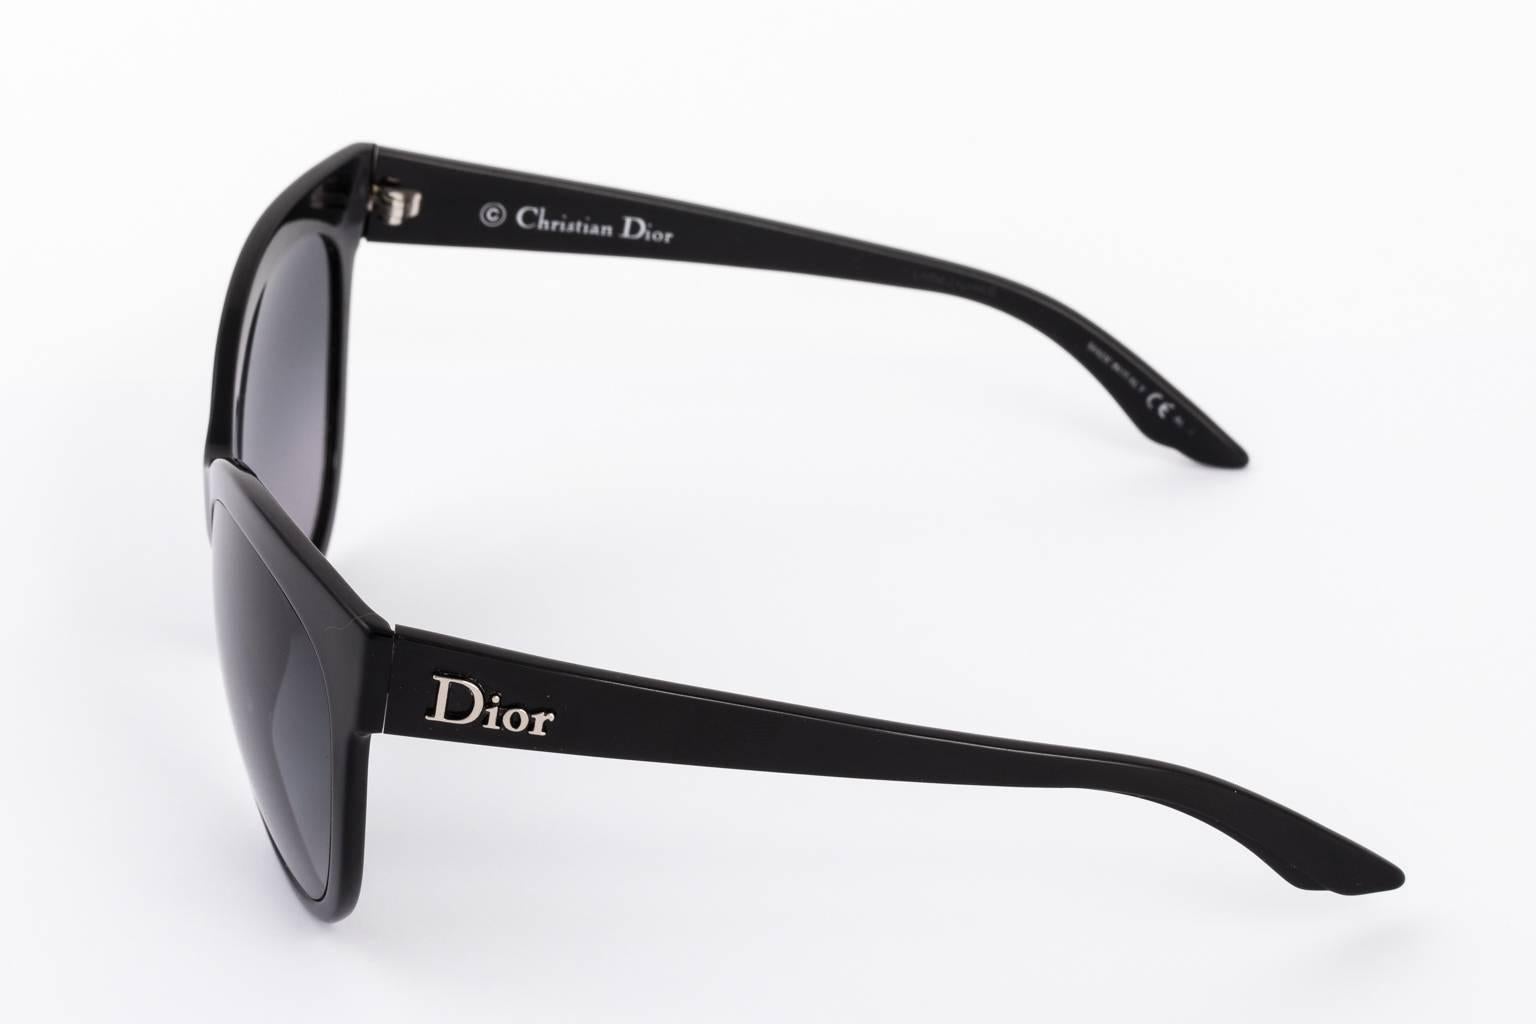 Set of contemporary large Dior sunglasses with matching case.